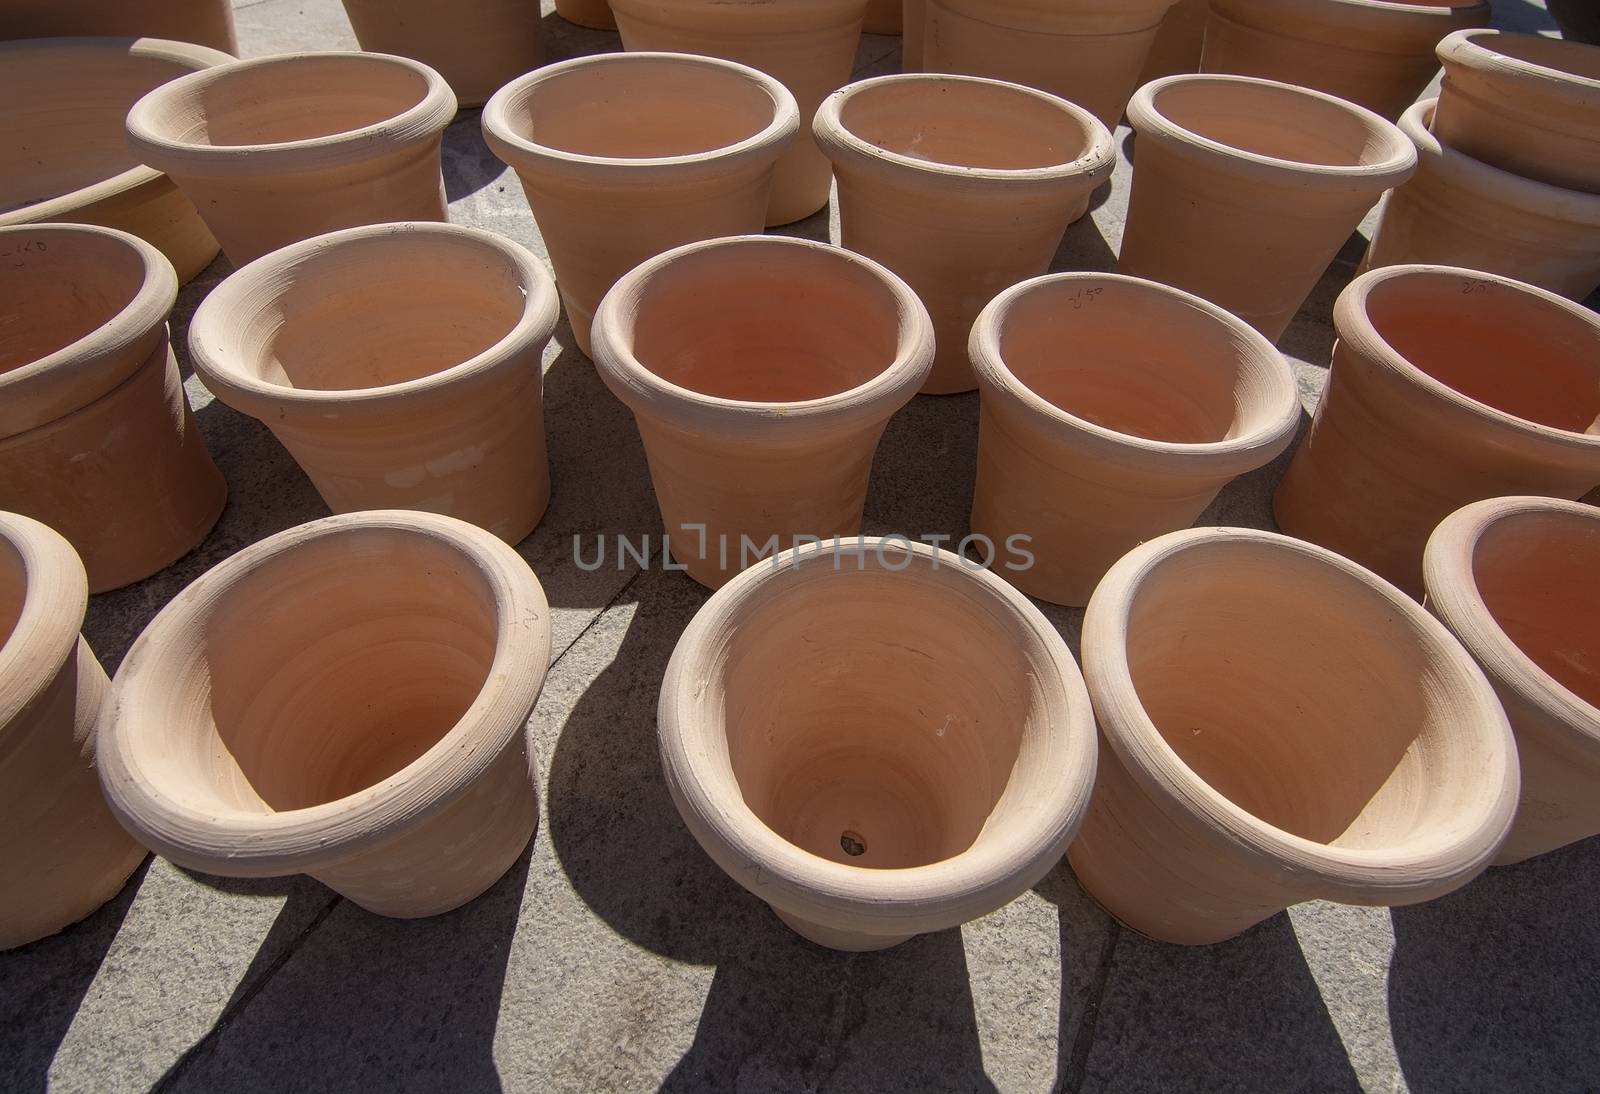 Nice newly made terracotta earthenware pots from above in Mallorca, Spain.